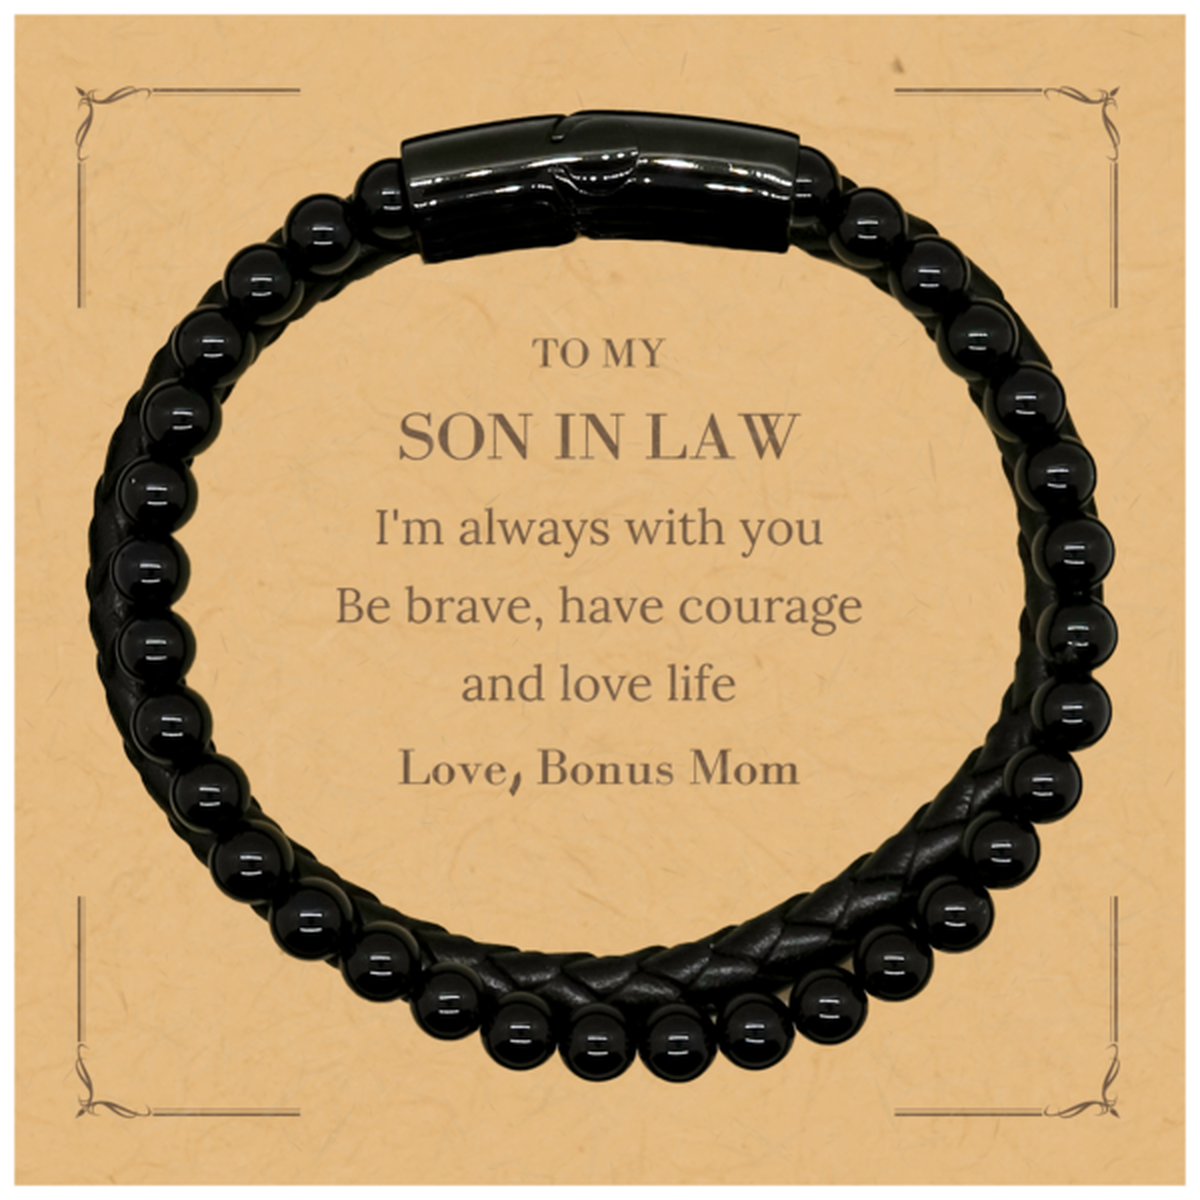 To My Son In Law Gifts from Bonus Mom, Unique Stone Leather Bracelets Inspirational Christmas Birthday Graduation Gifts for Son In Law I'm always with you. Be brave, have courage and love life. Love, Bonus Mom